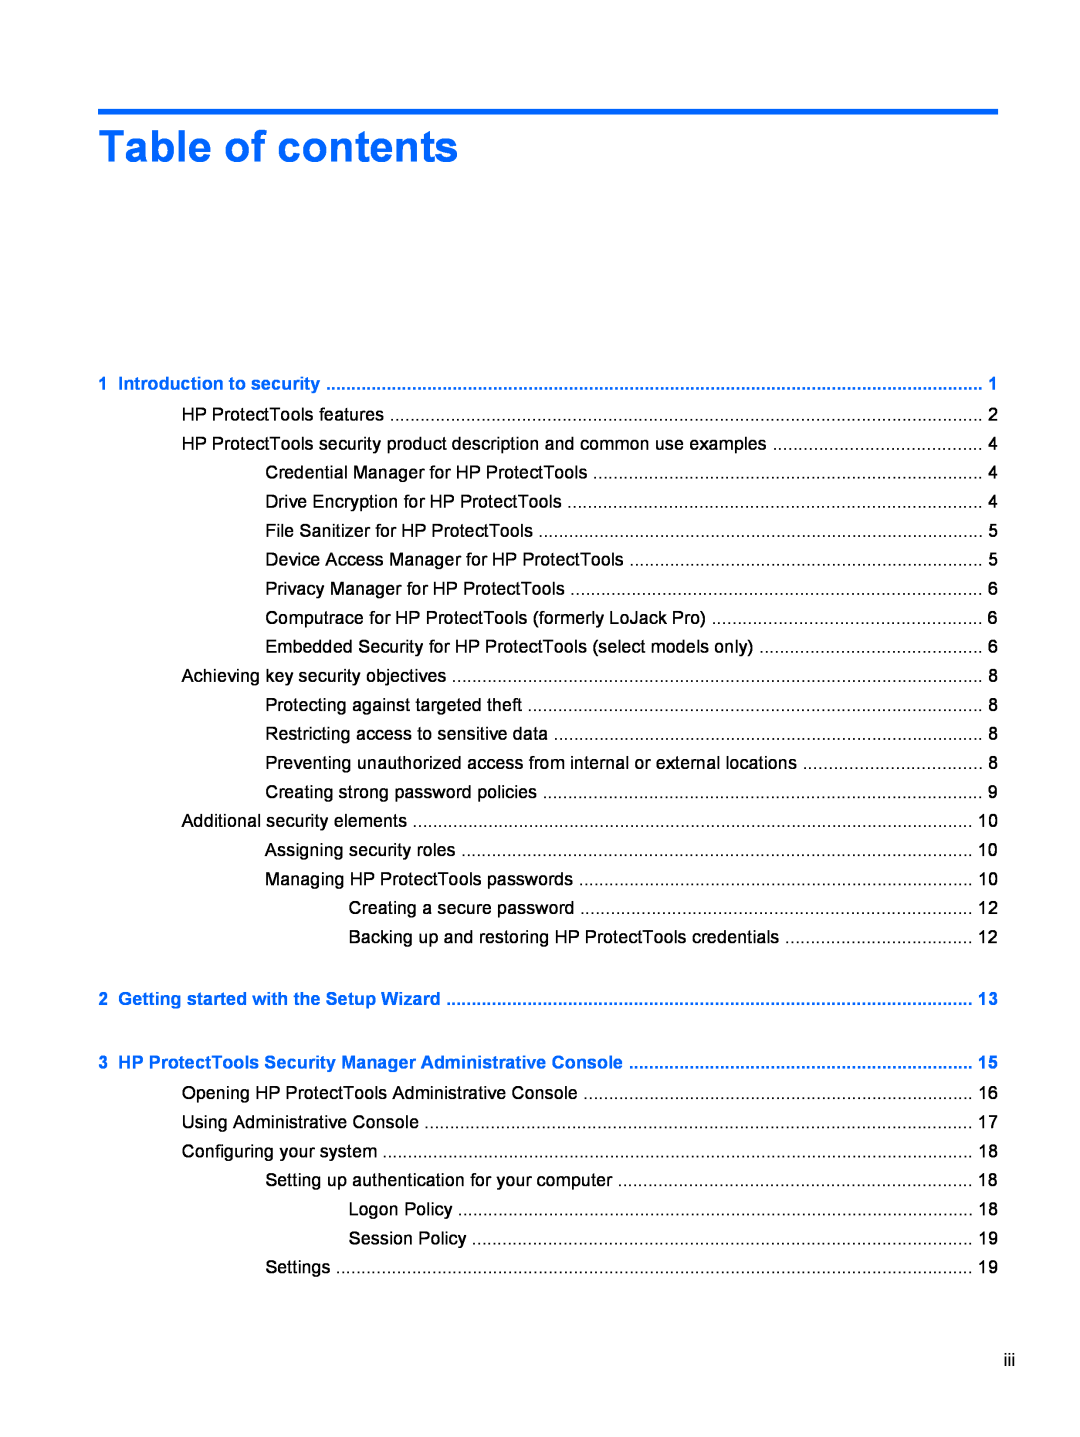 HP 2 Base Model manual Table of contents 